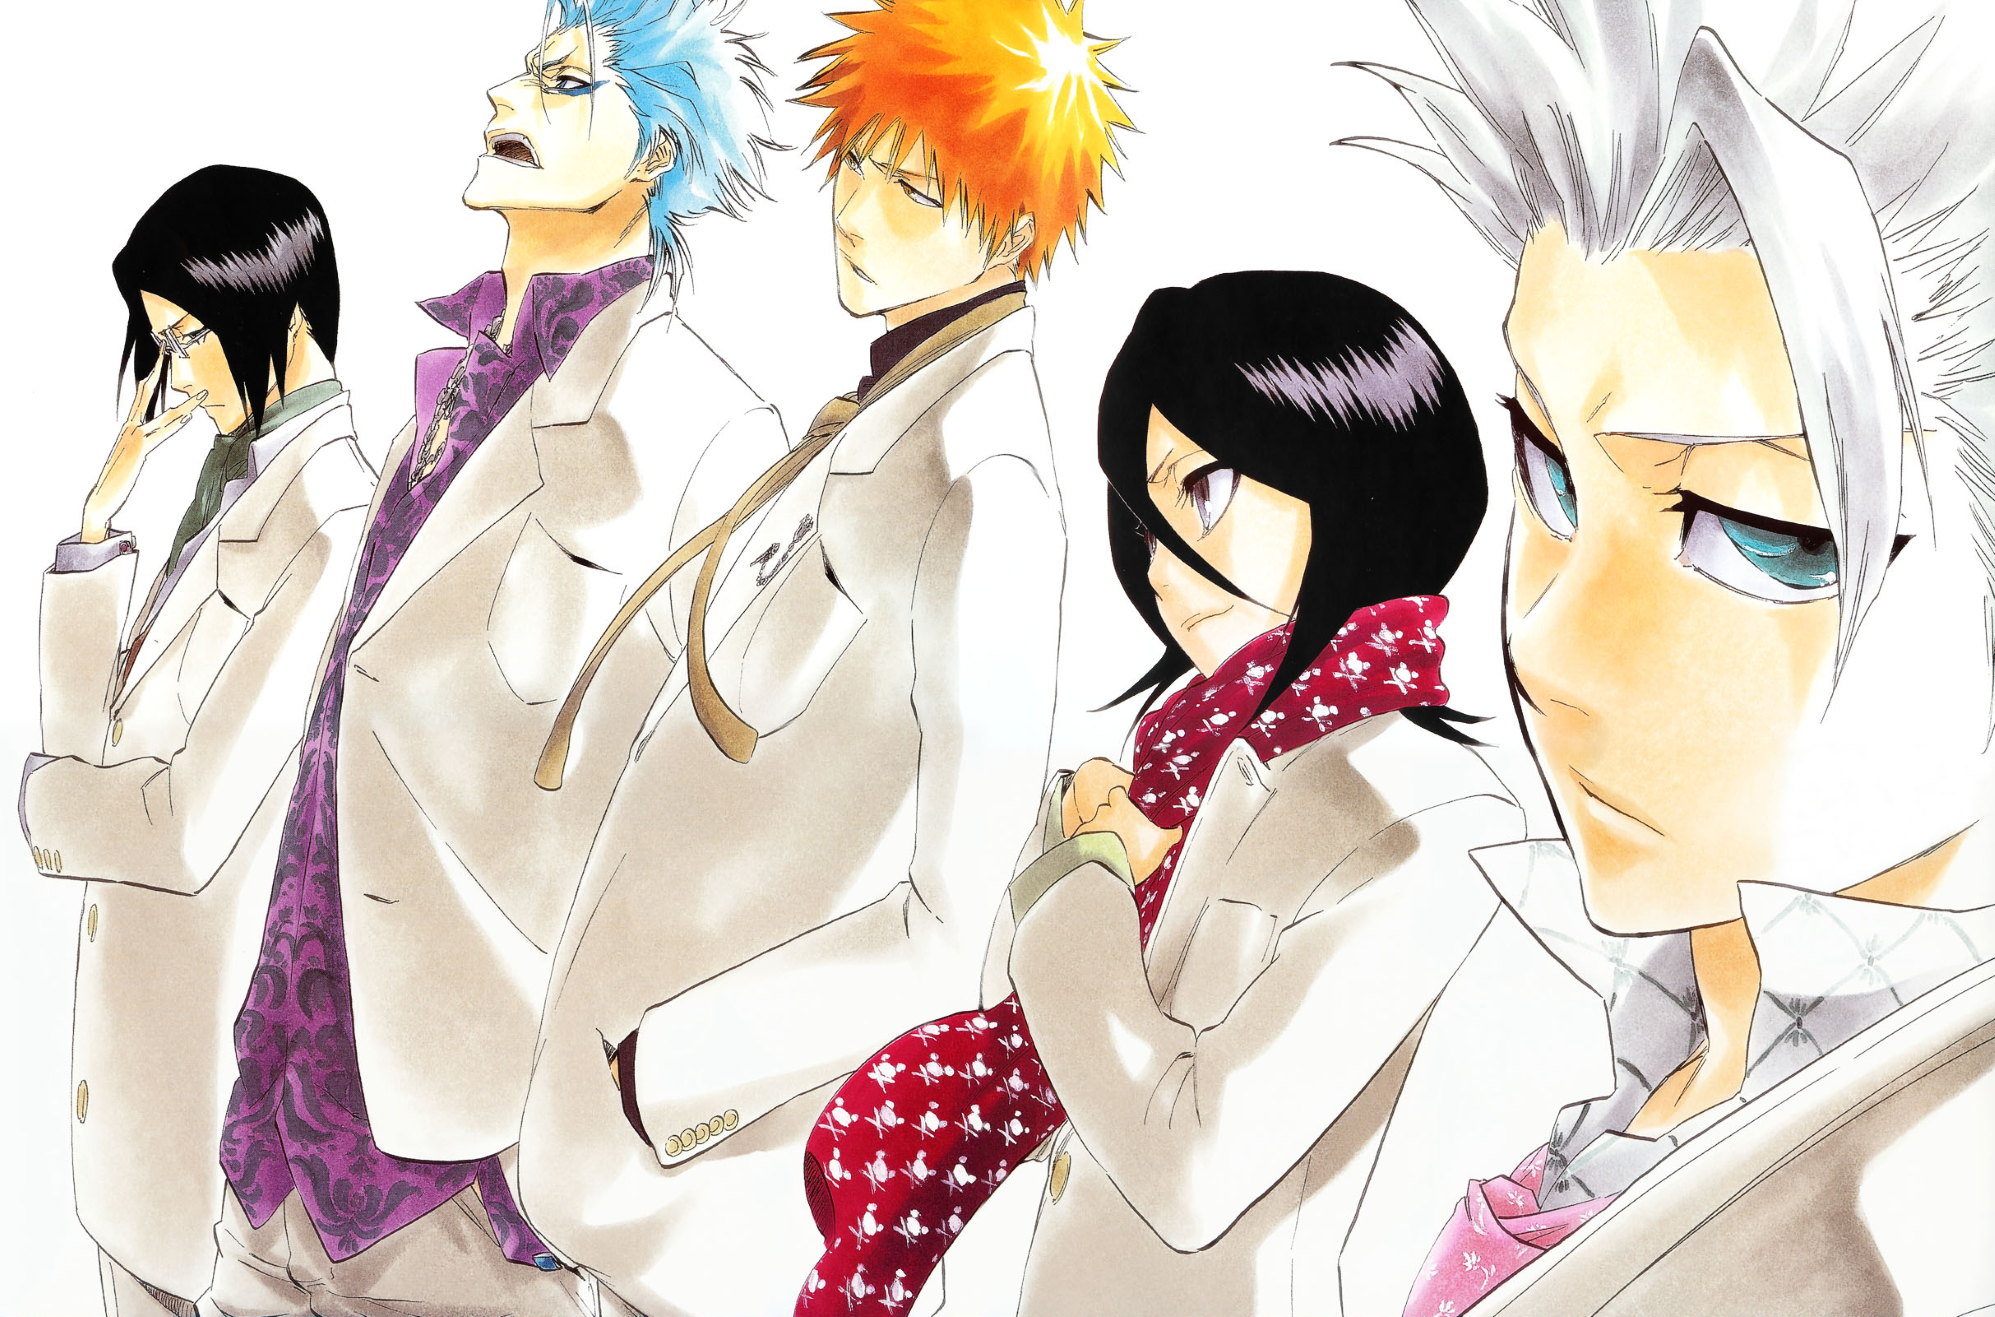 Anime Corner - With votes from 48,000+ people, BLEACH